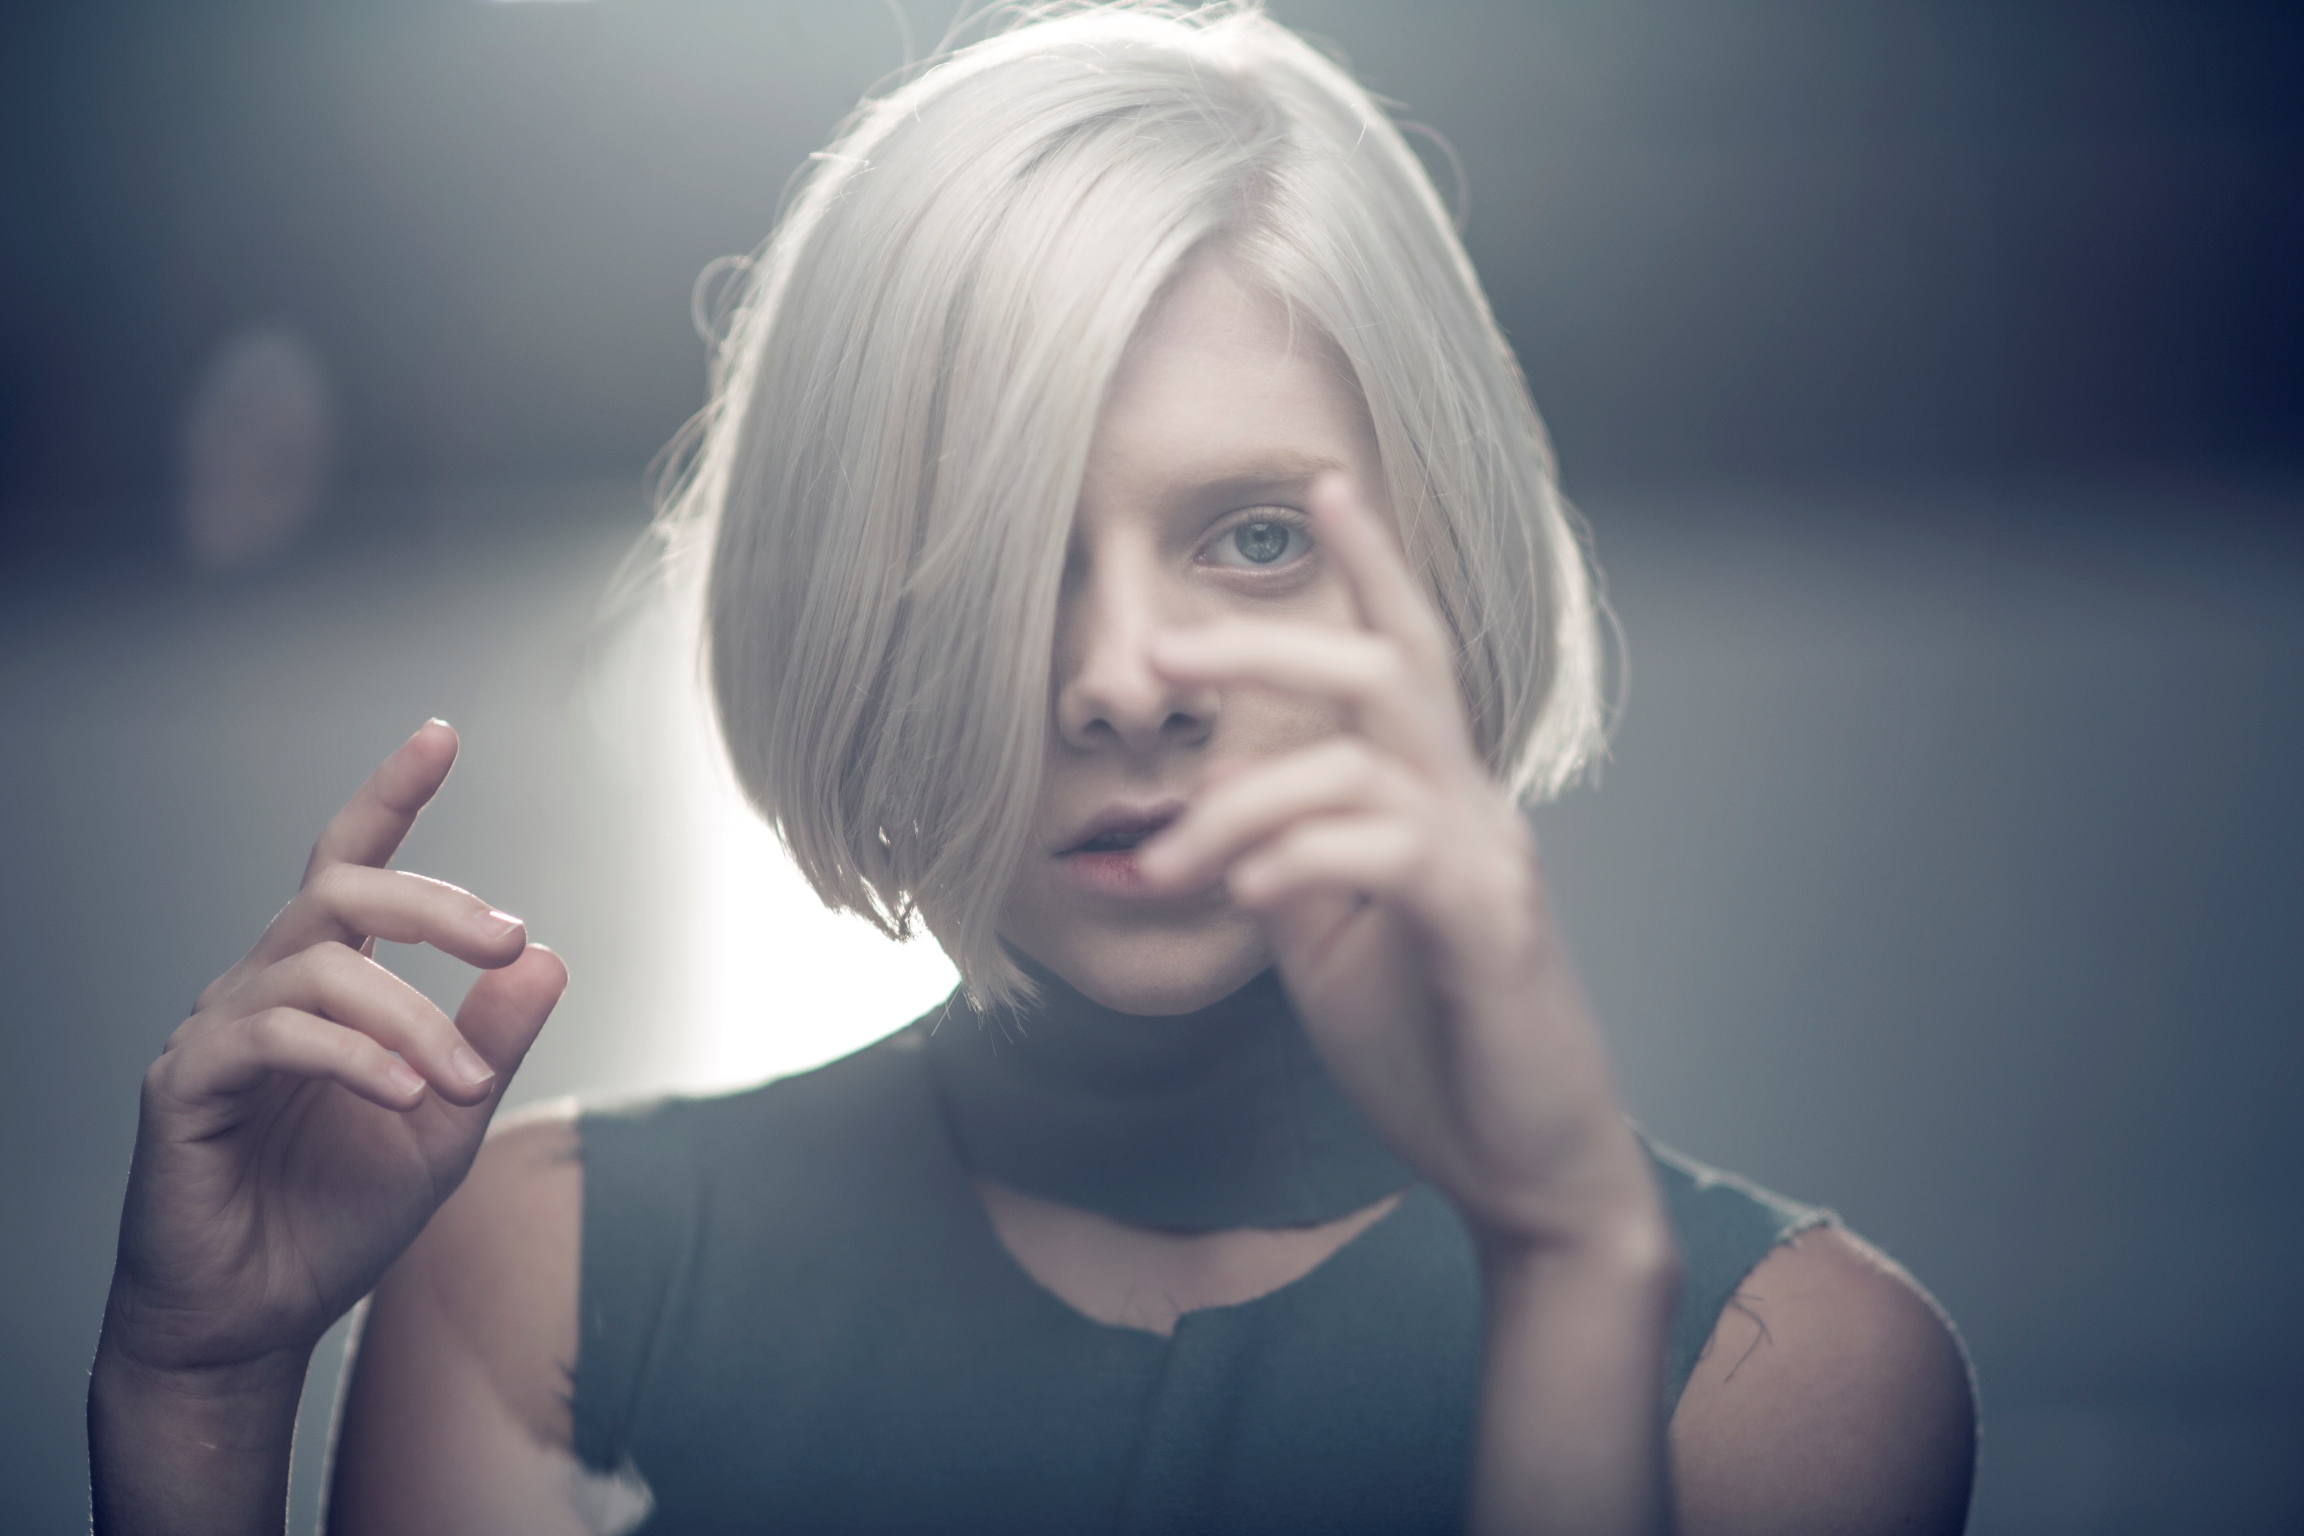 Videopremiere: Aurora - Running with the wolves we love nordic.